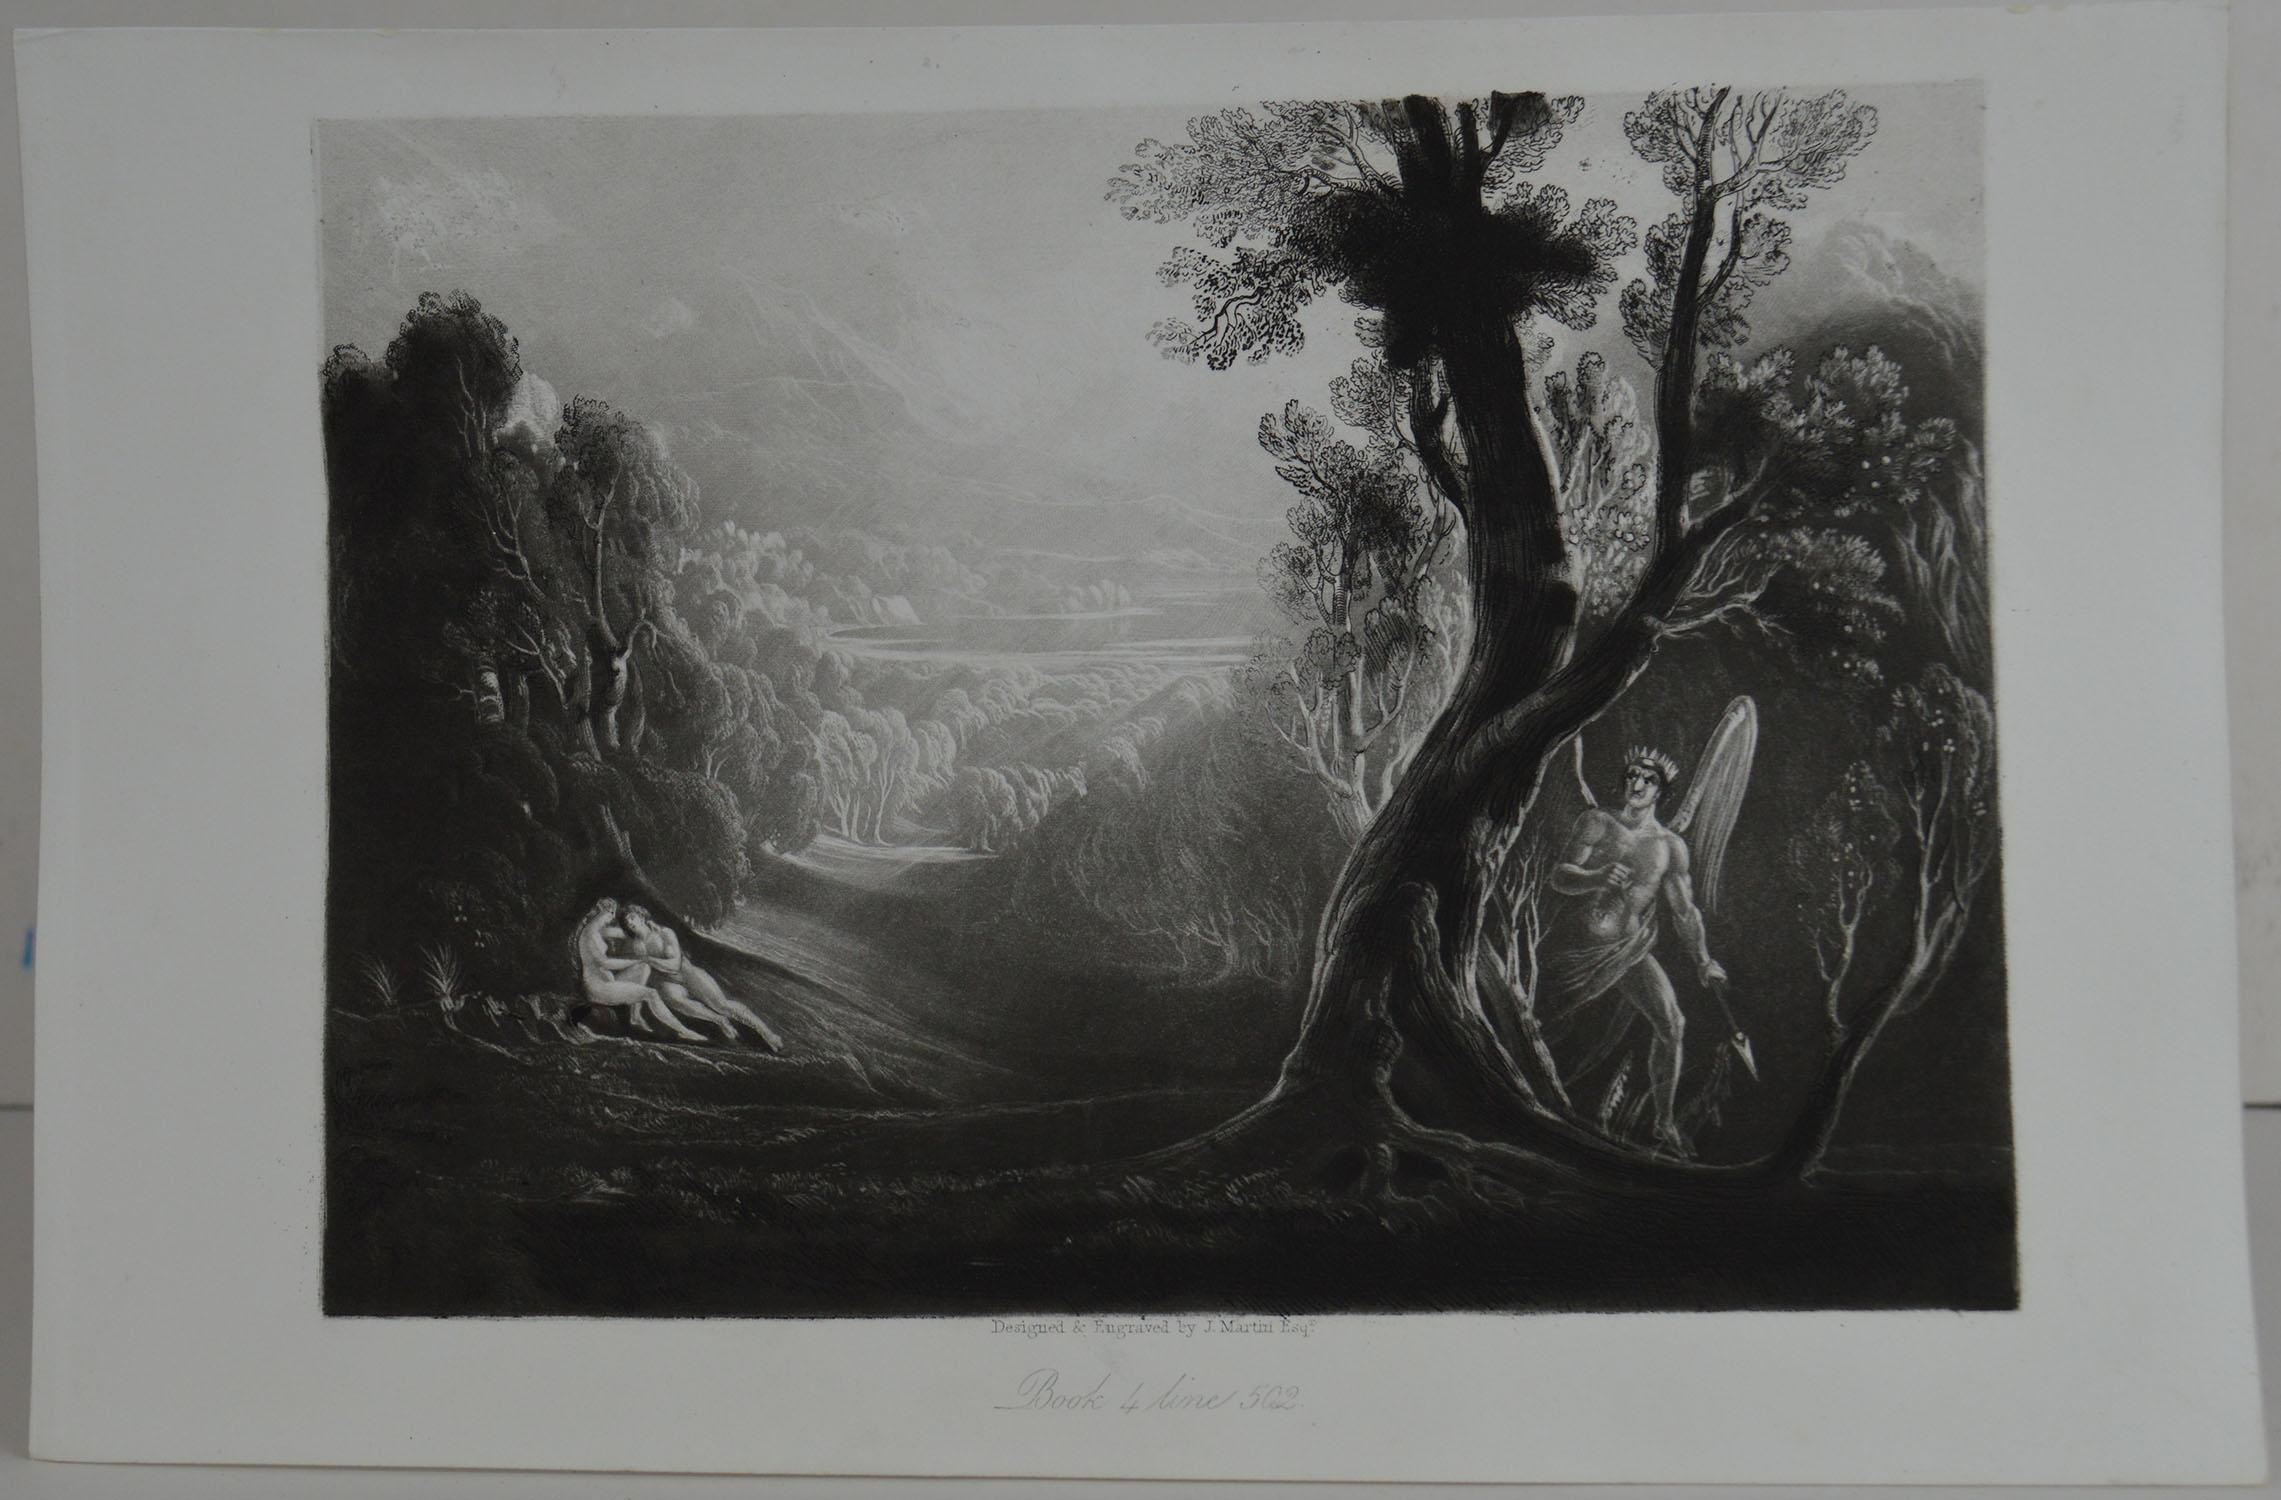 Sensational image by John Martin.

Titled: Satan Contemplating Adam and Eve in Paradise

Drawn and engraved by John Martin. From the highly regarded Washbourne Publication of Milton's Paradise Lost, 1853.

Unframed.

 